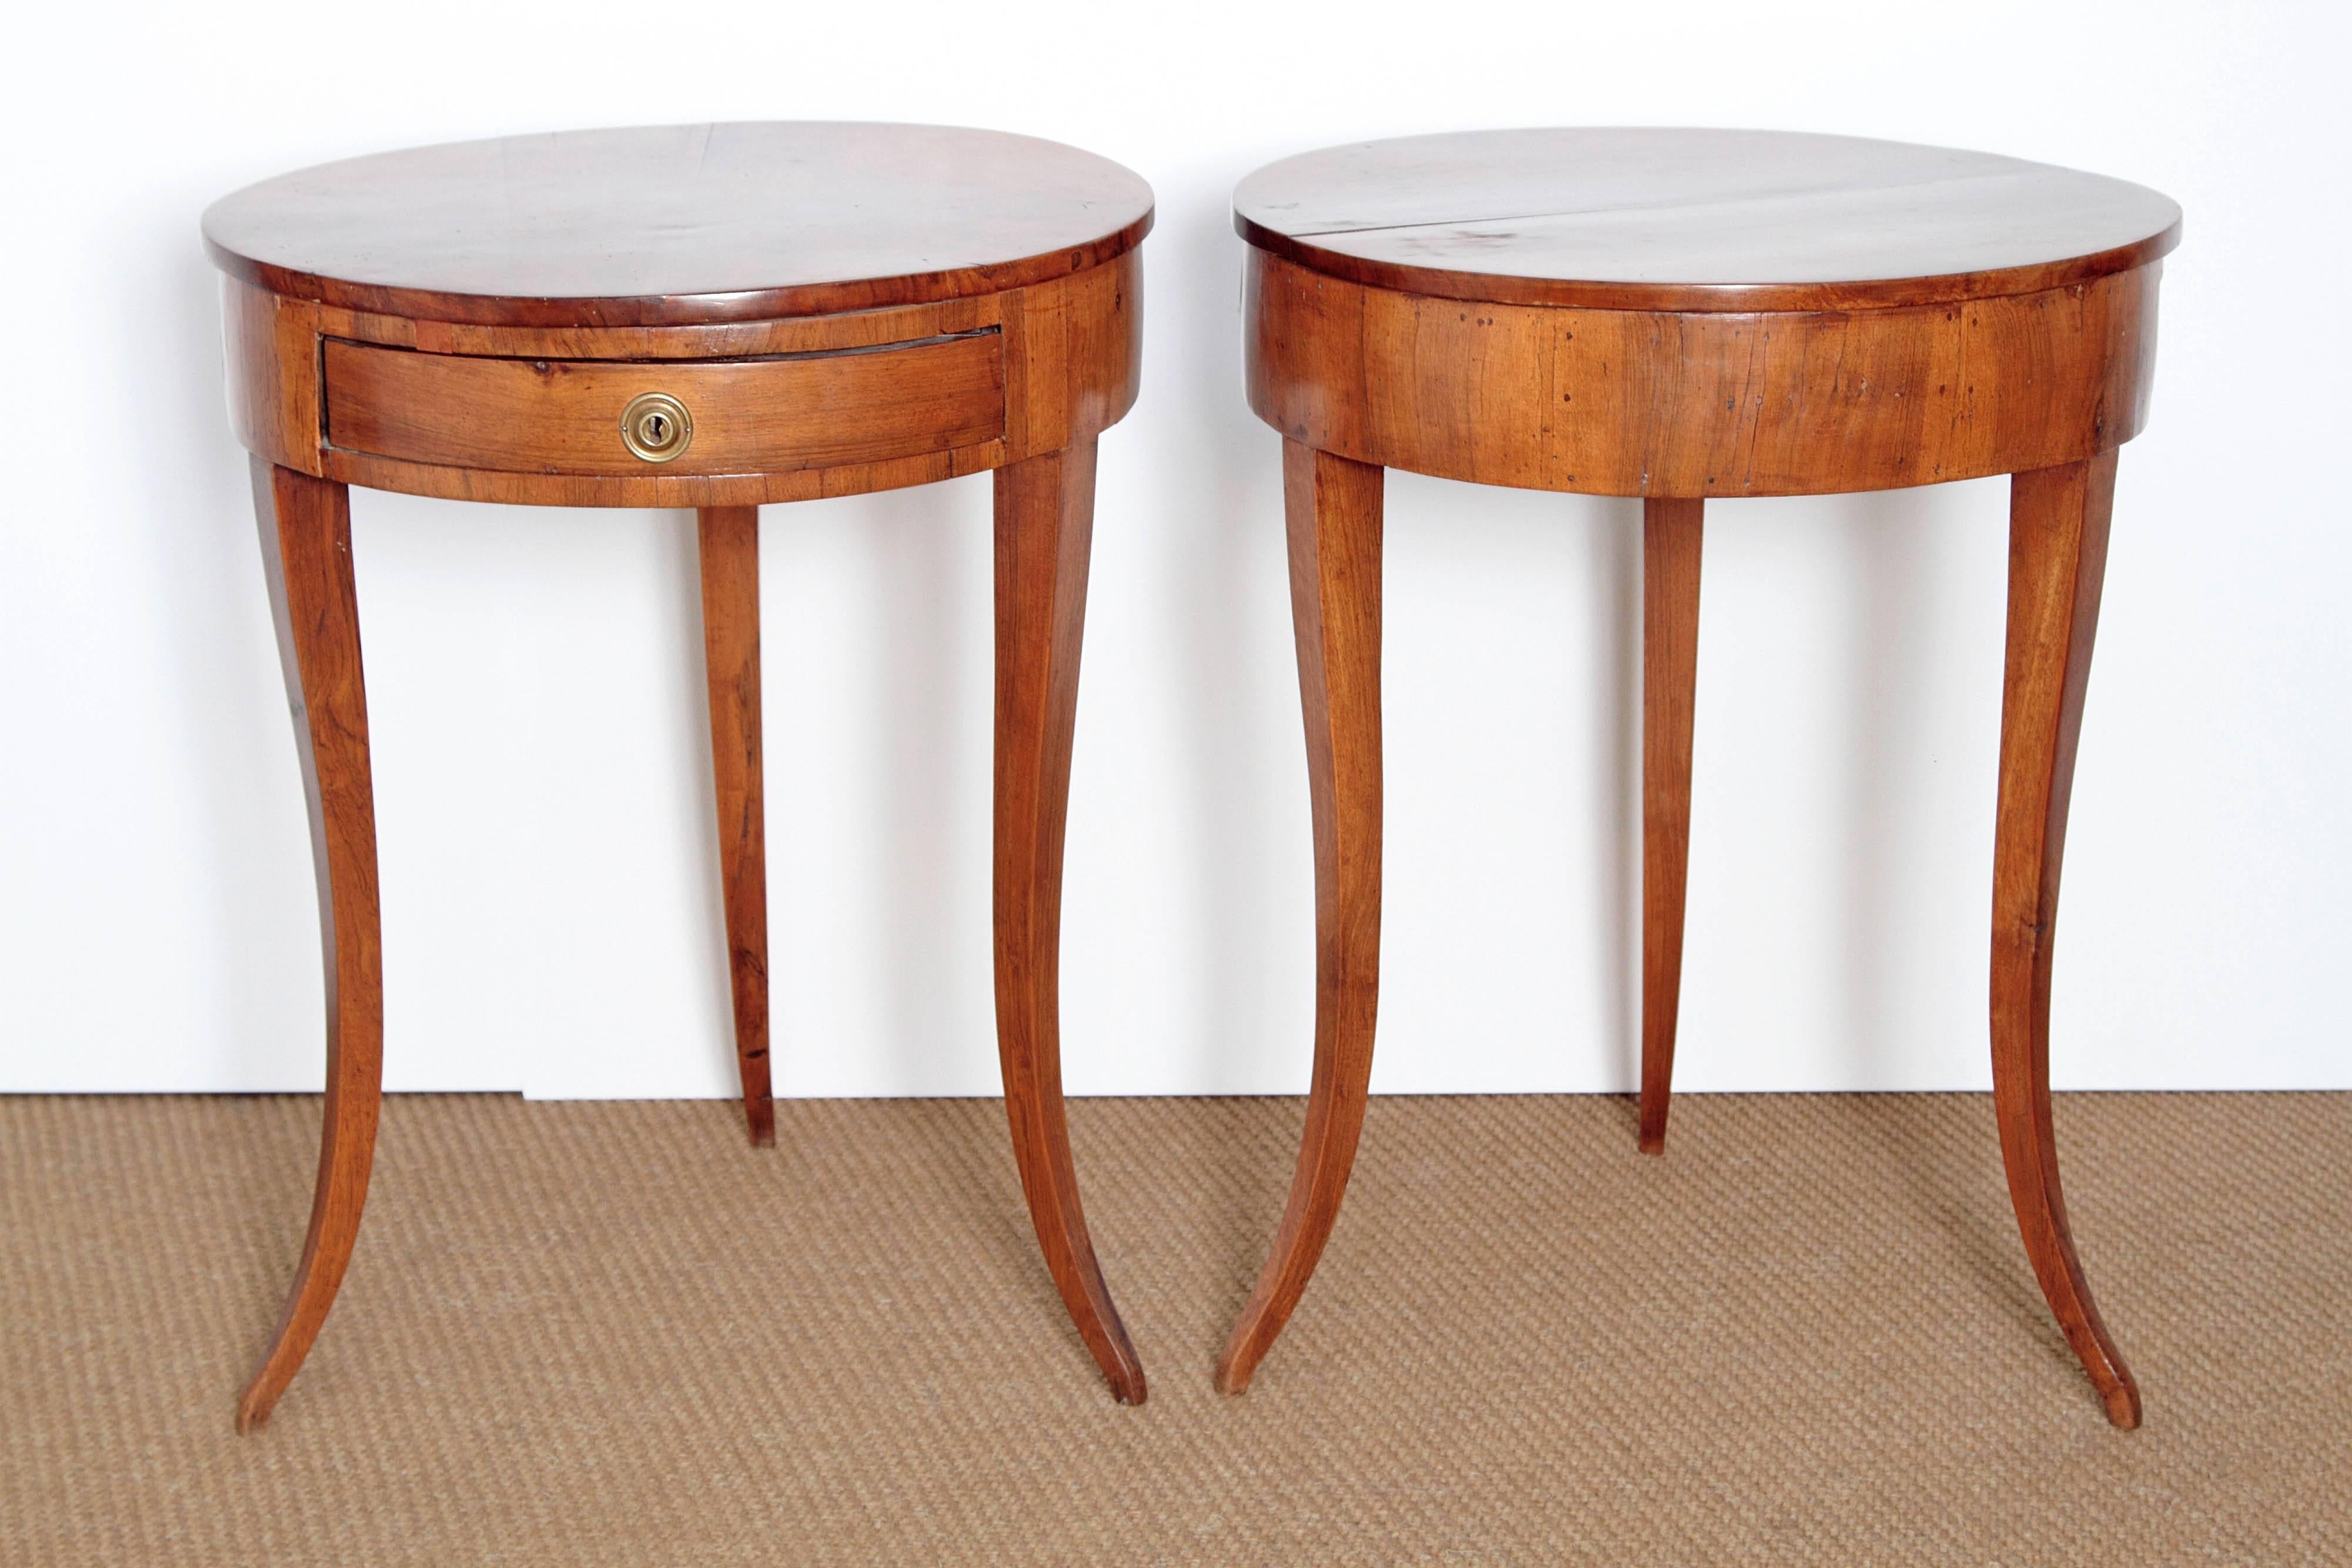 Early 19th century, pair of small Continental side tables or gueridons, neoclassical, possibly German, each has a single drawer and each has three (3) slender saber legs.